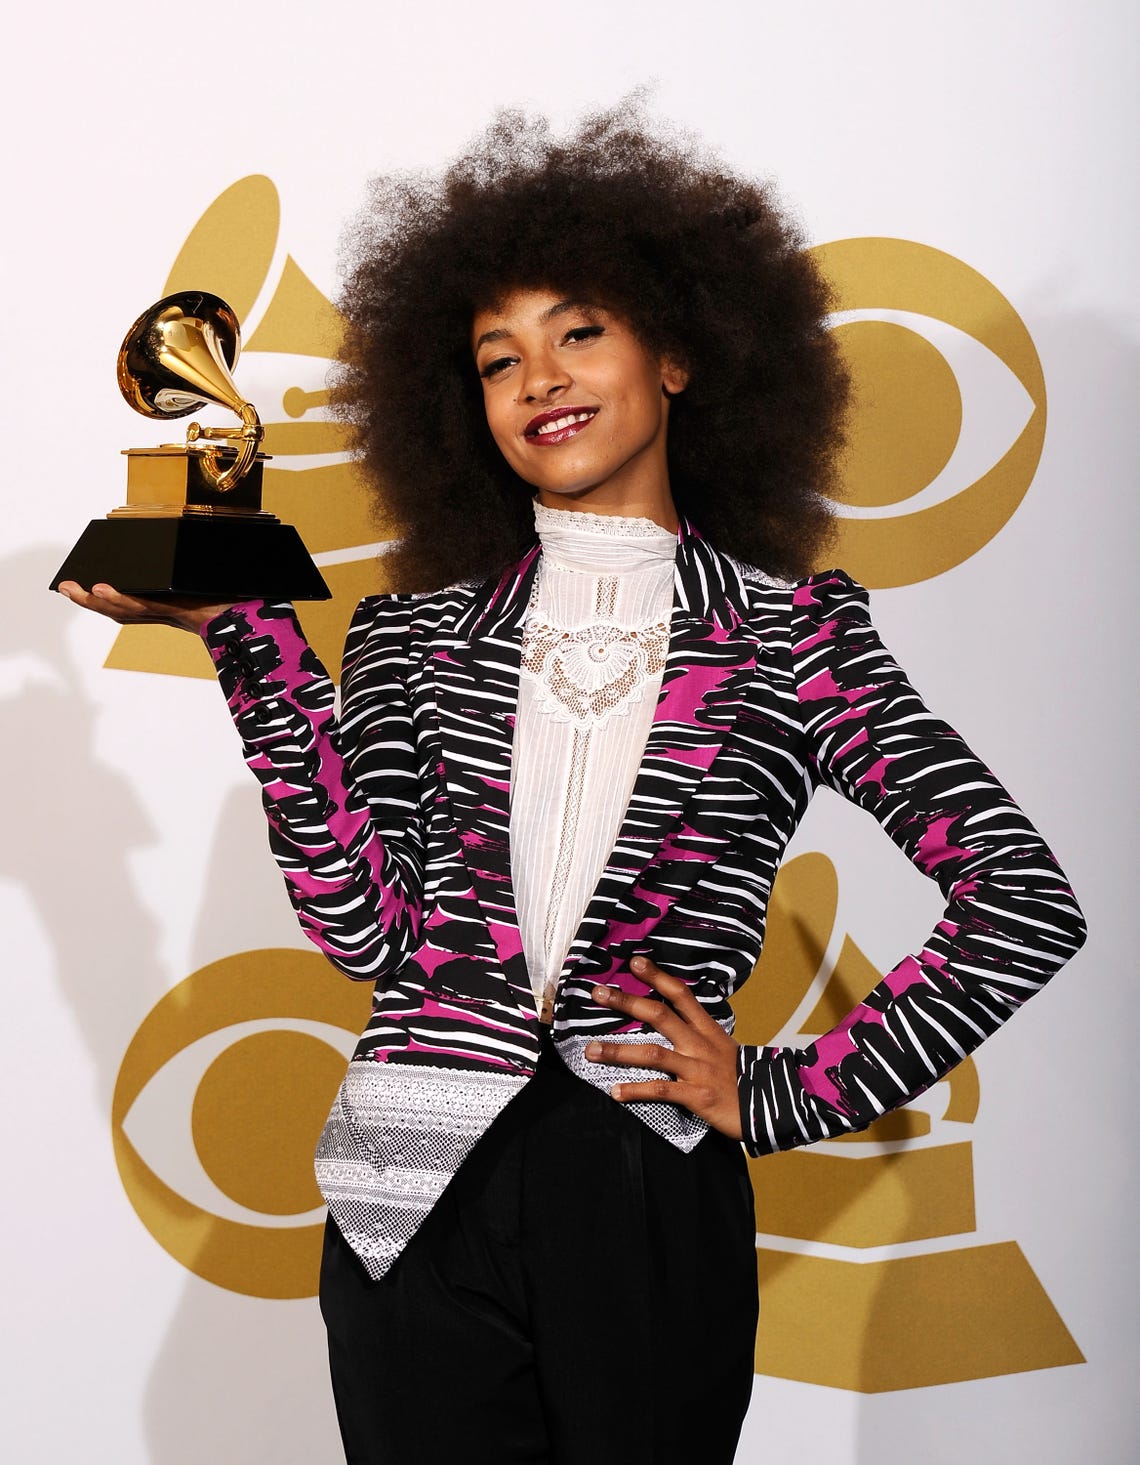 12 Biggest GRAMMY Upsets of All Time